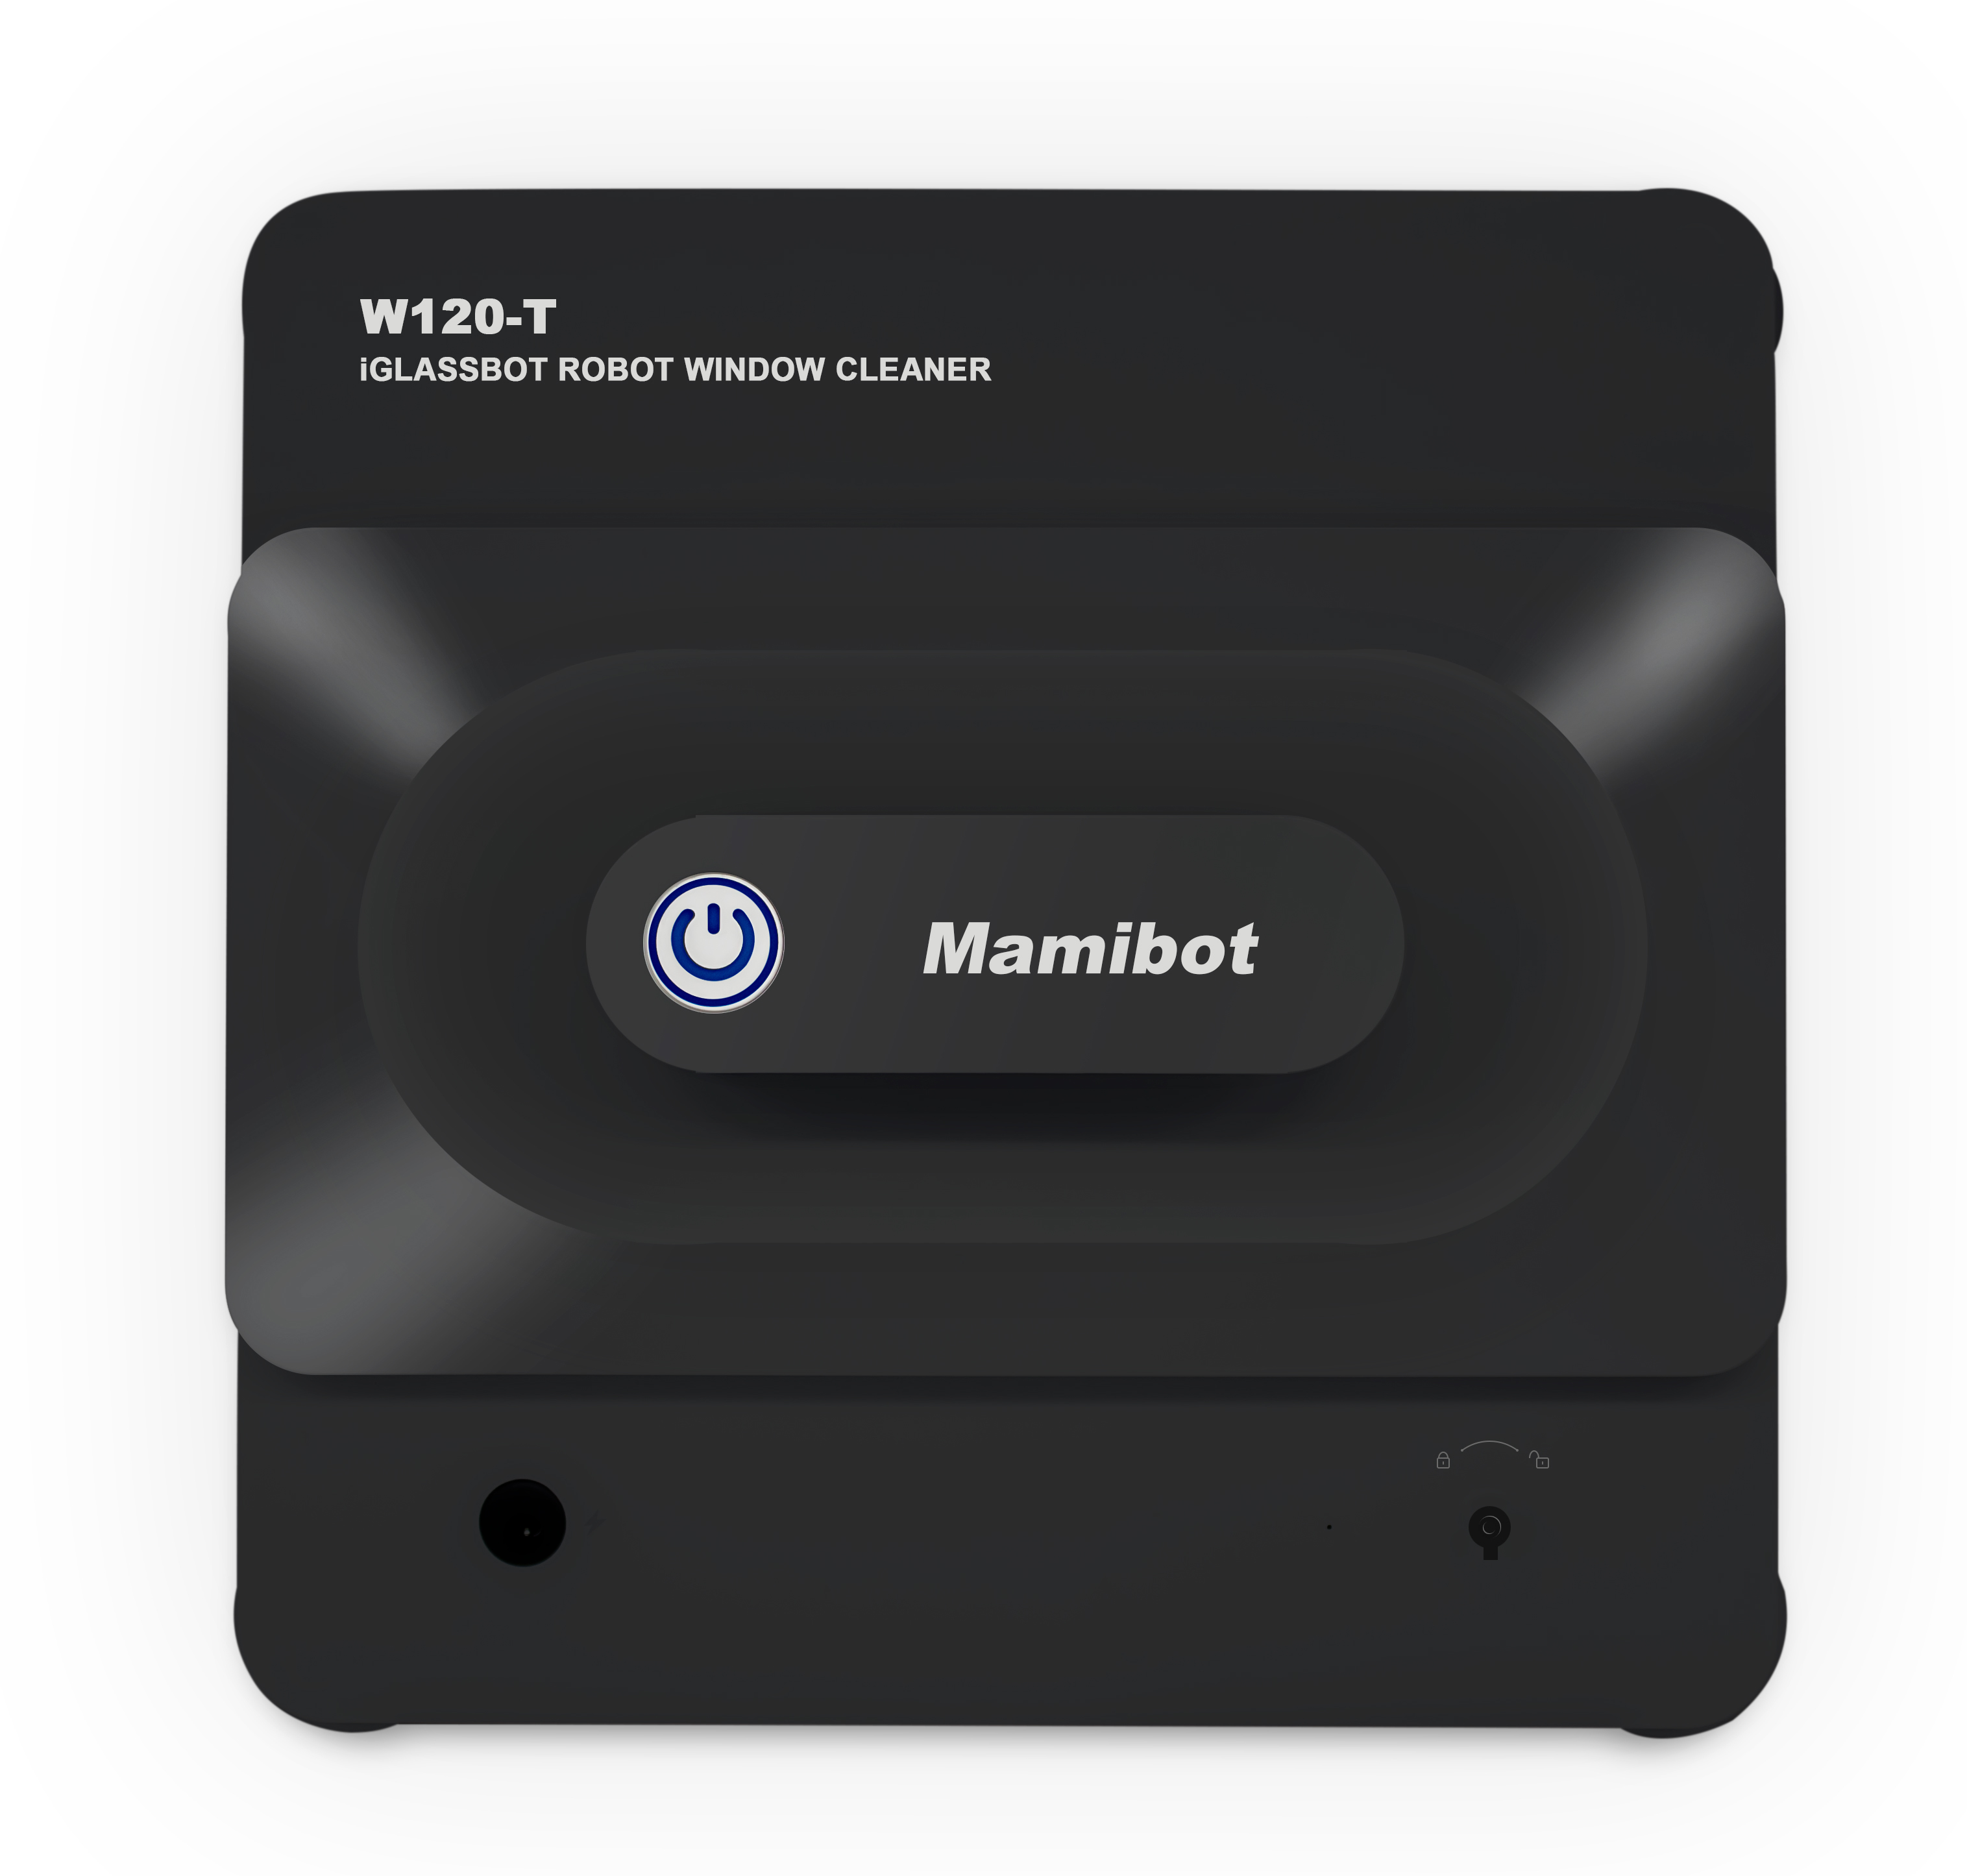 Mamibot Window Cleaning Robot W120-T black